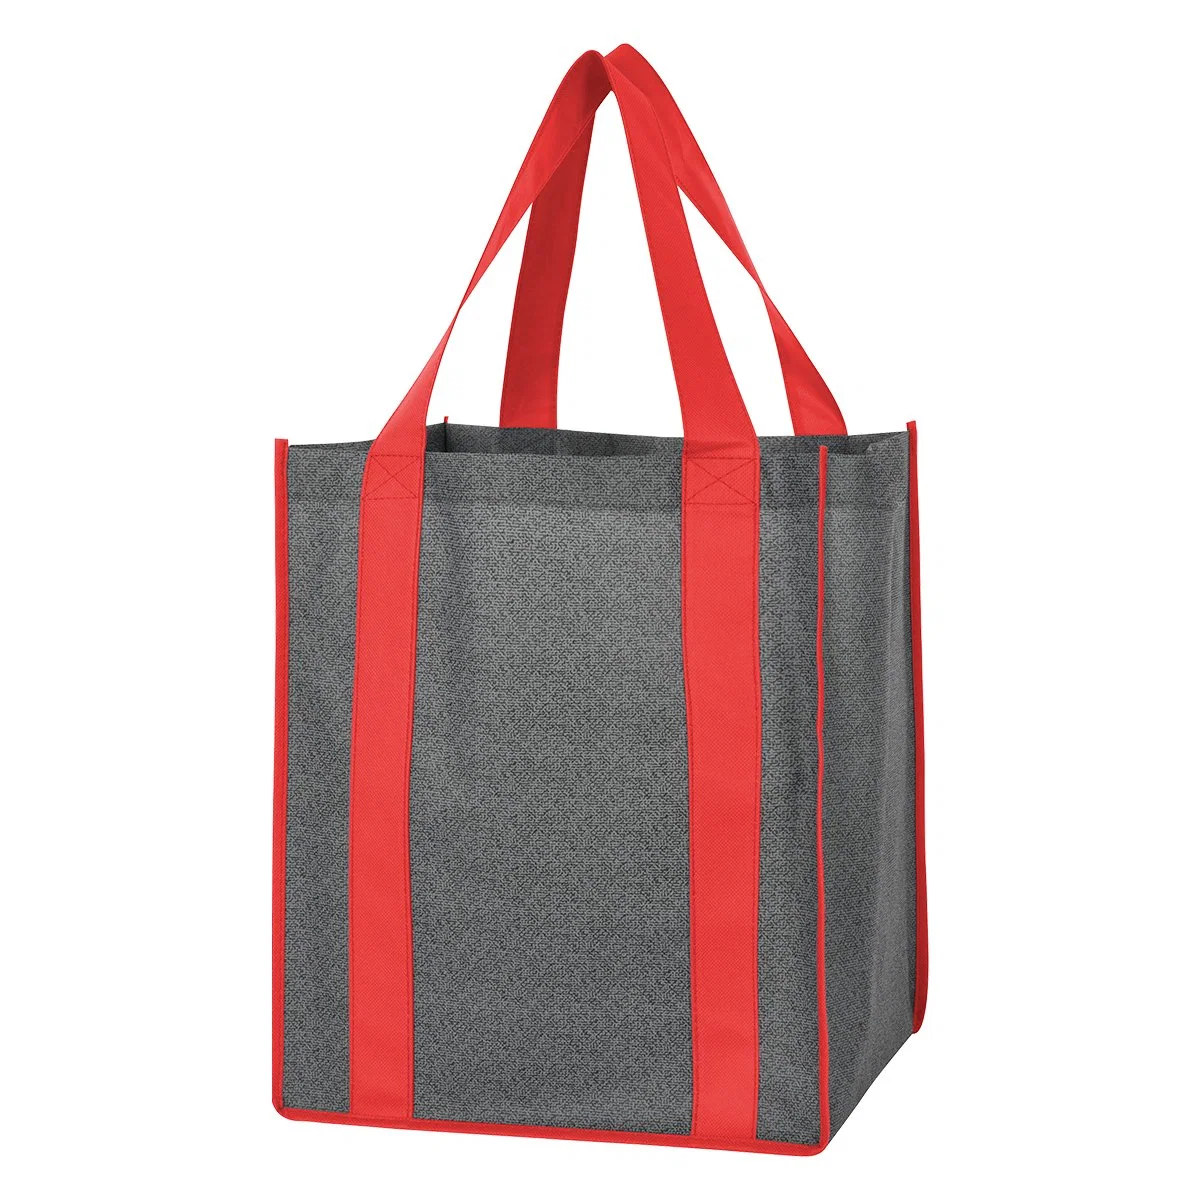 Eco Friendly Promotional Light Weight Non-Woven Shopping Bags Market Bag